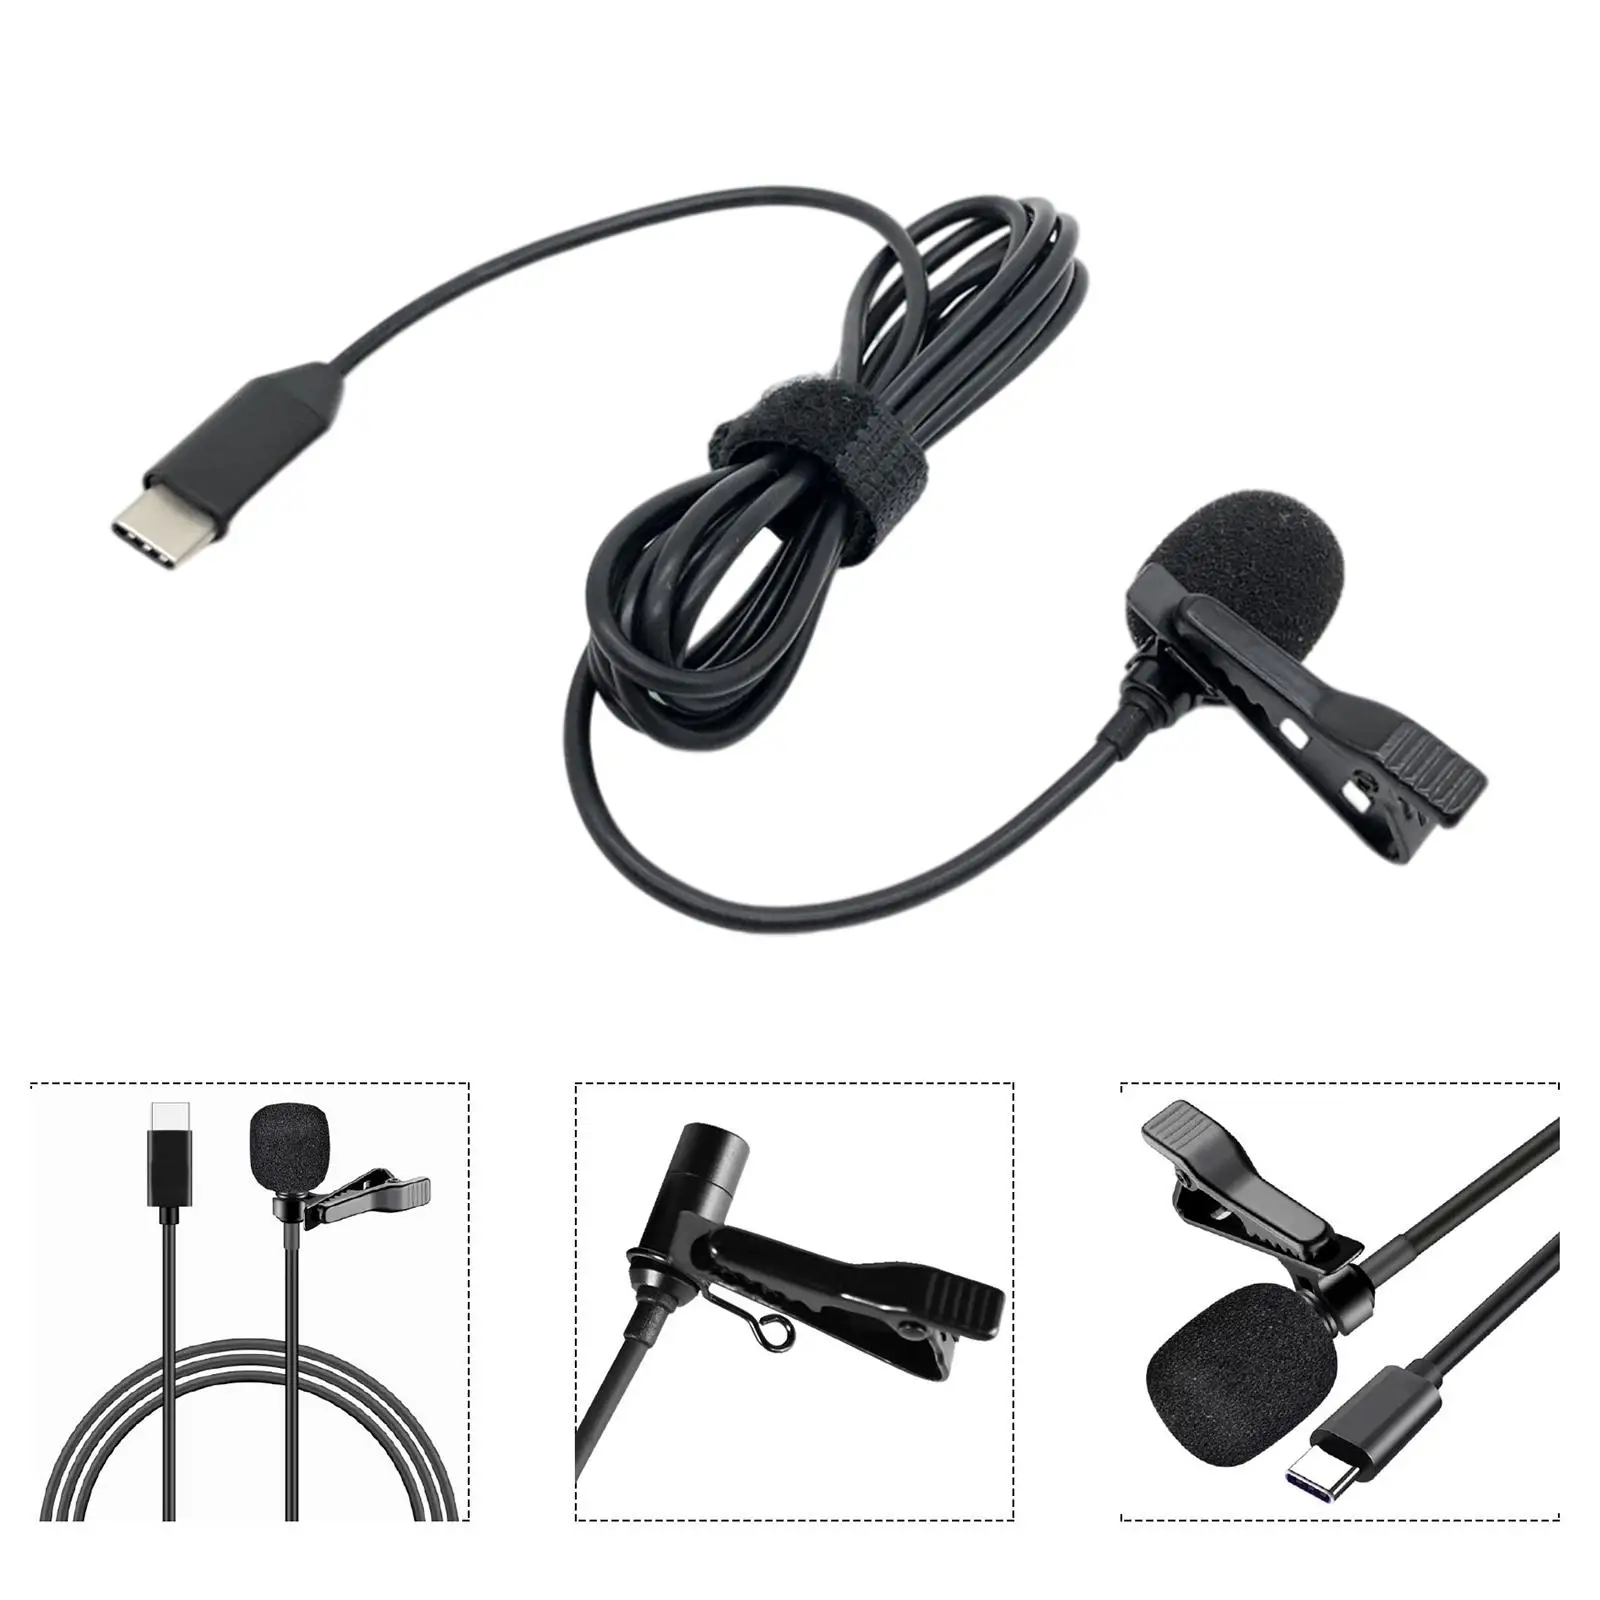 Portable Lavalier Lapel Microphone, Type C with Clip Pro Audio Mic Omnidirectional HiFi Sound, Sport Camera Vlogger Video Vlog